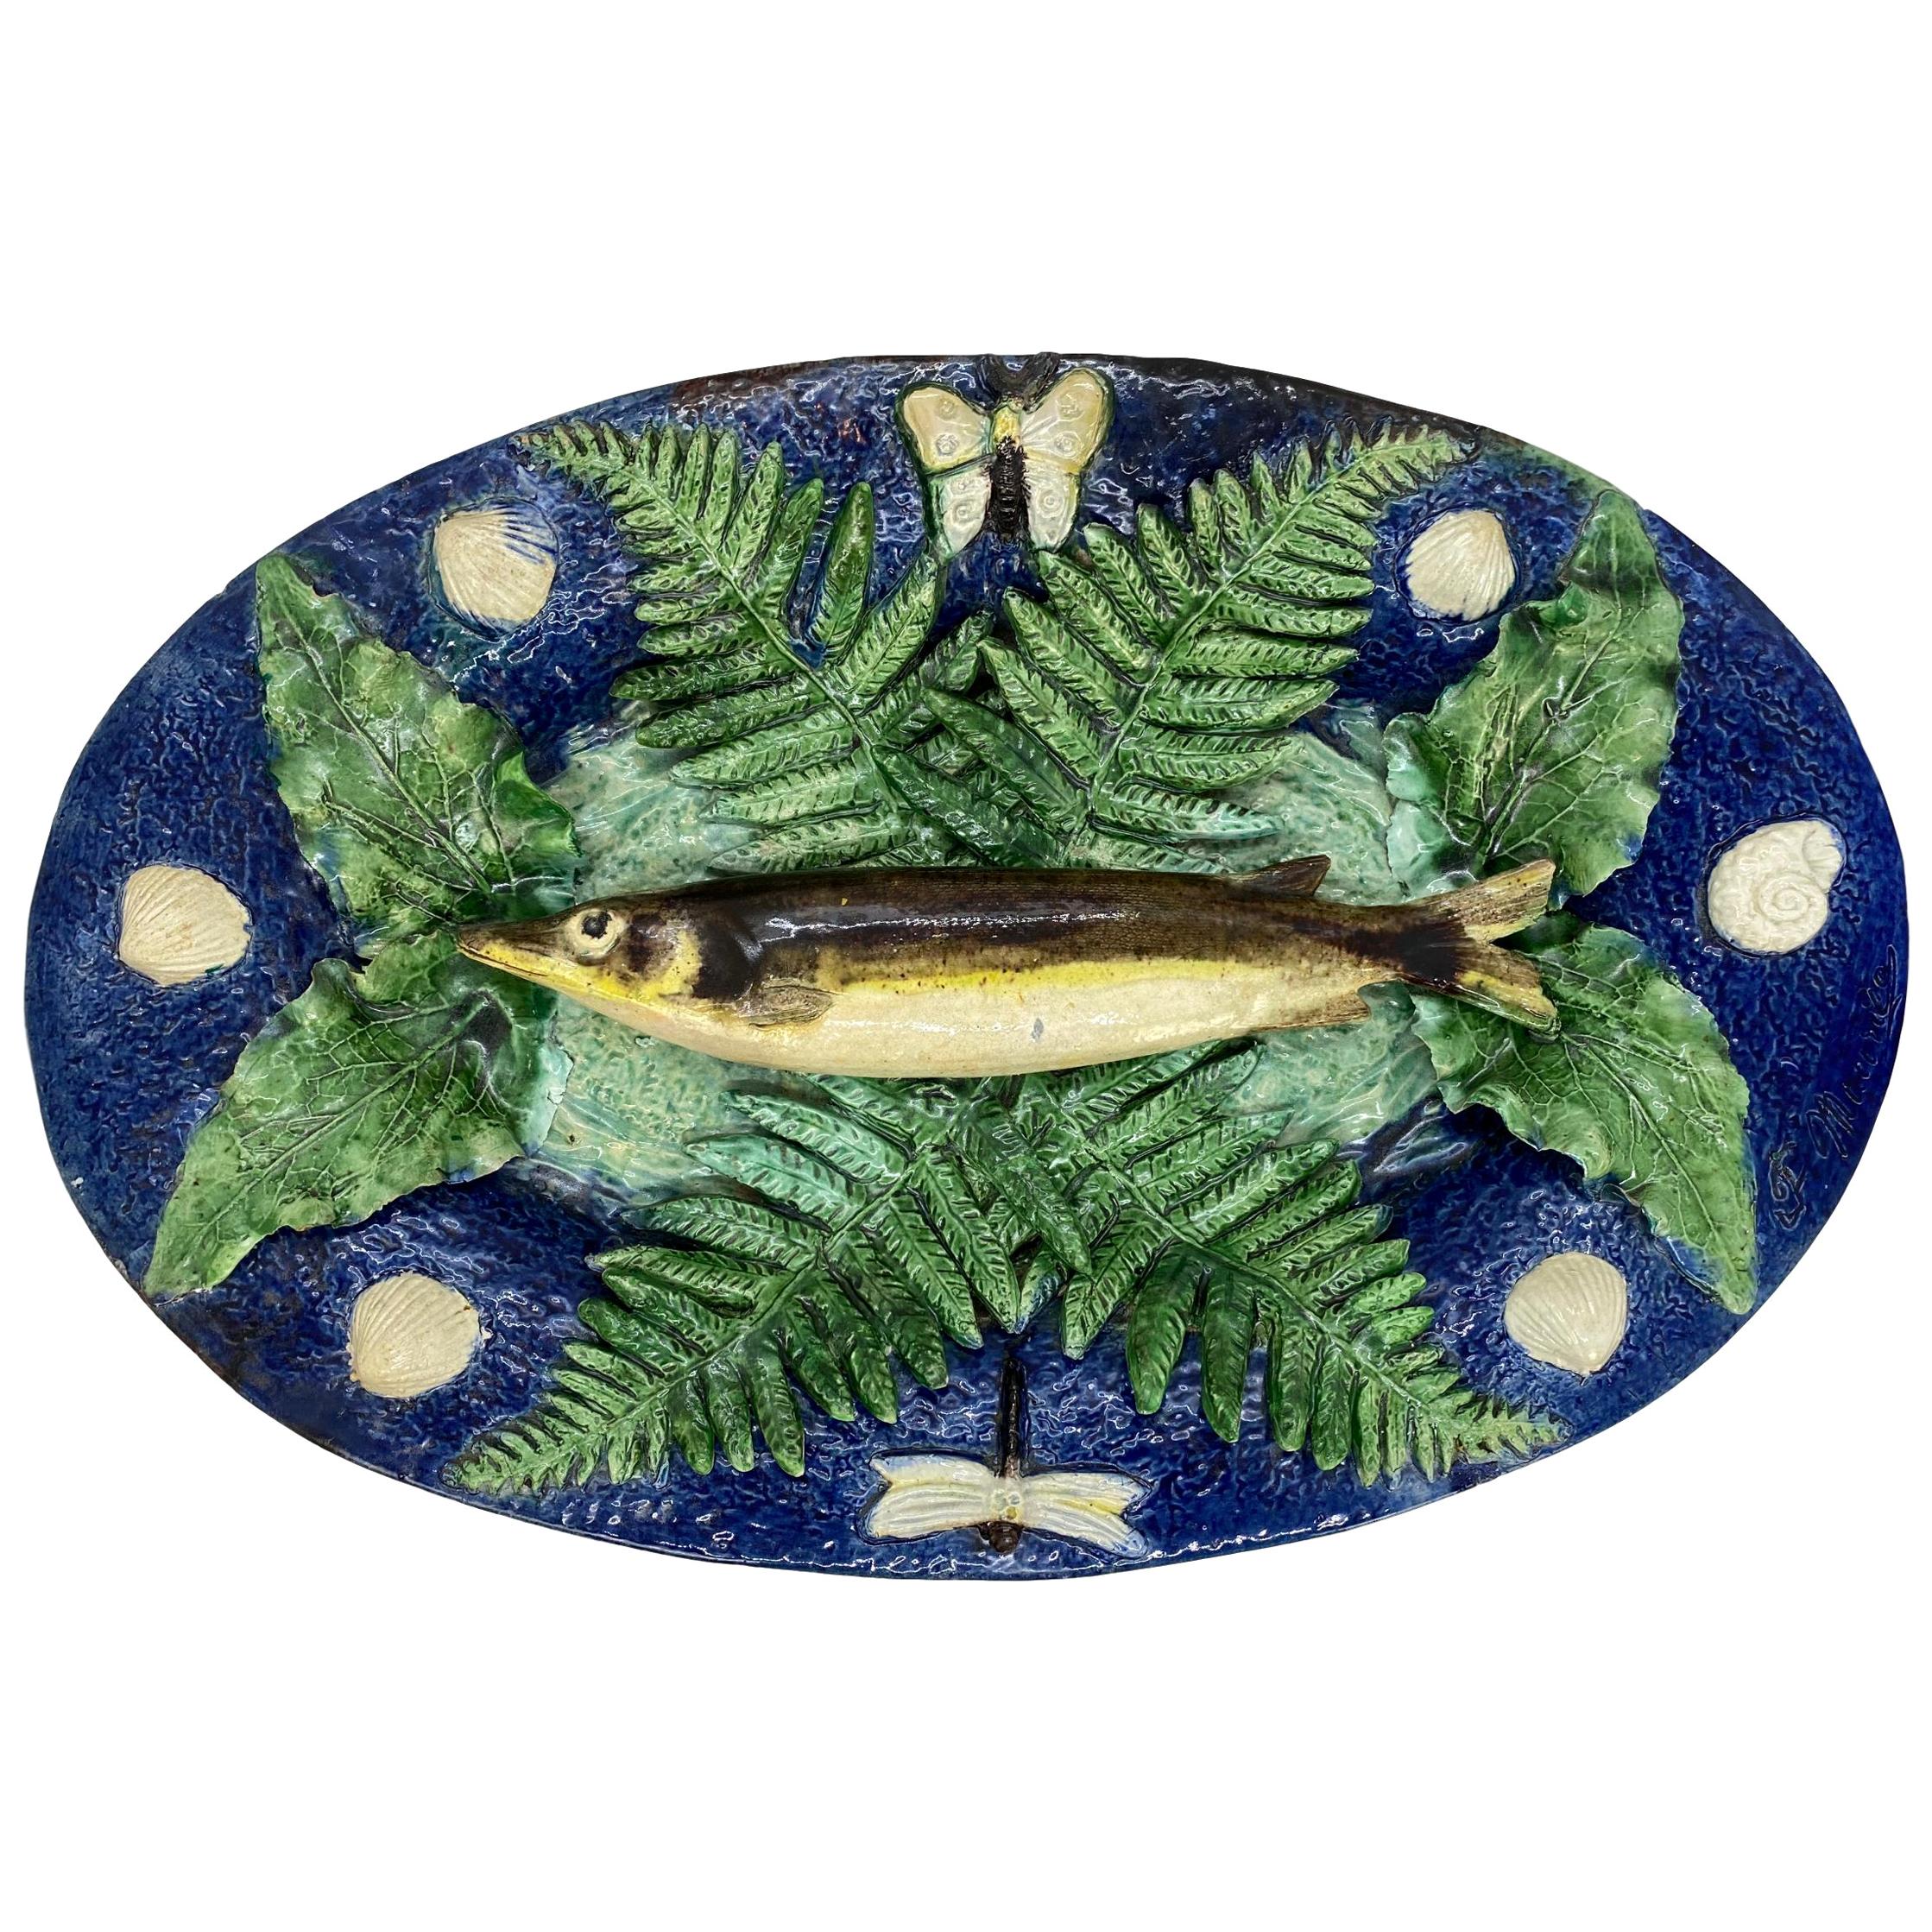 Large Franҫois Maurice Palissy Ware Majolica Trompe L'oeil Fish Plaque, 1880